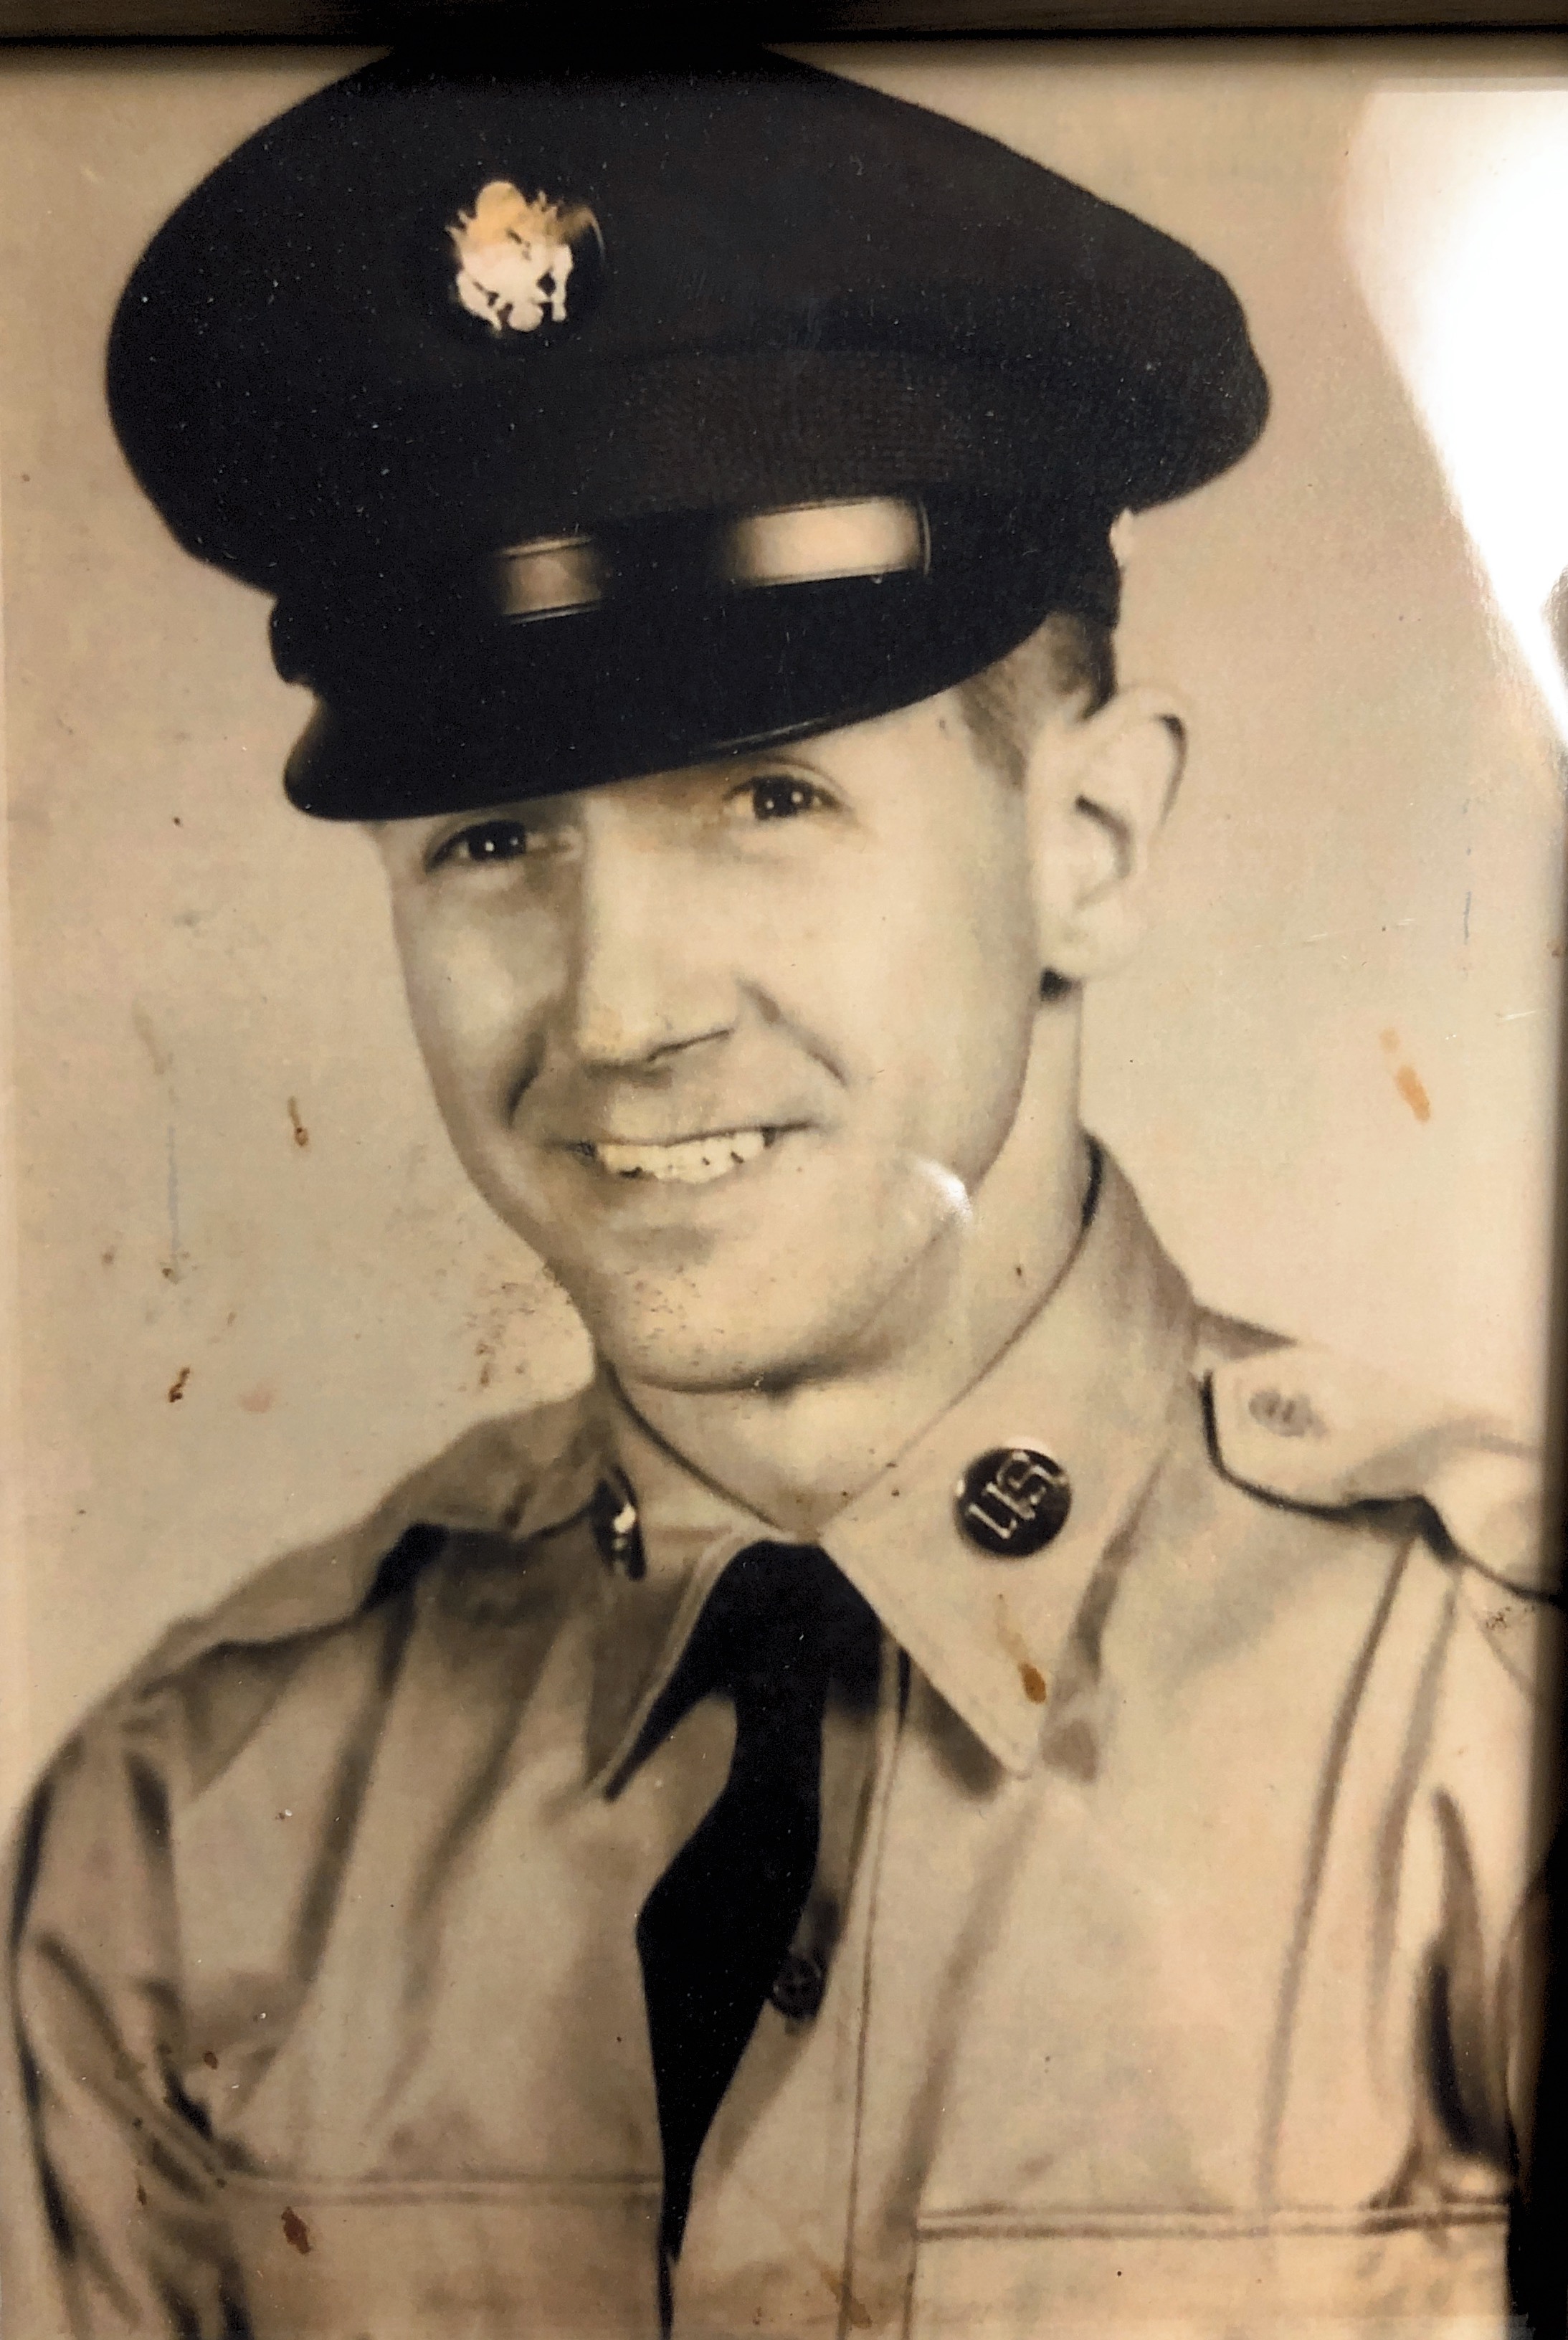 Dad in the Army. Photo taken 1963.